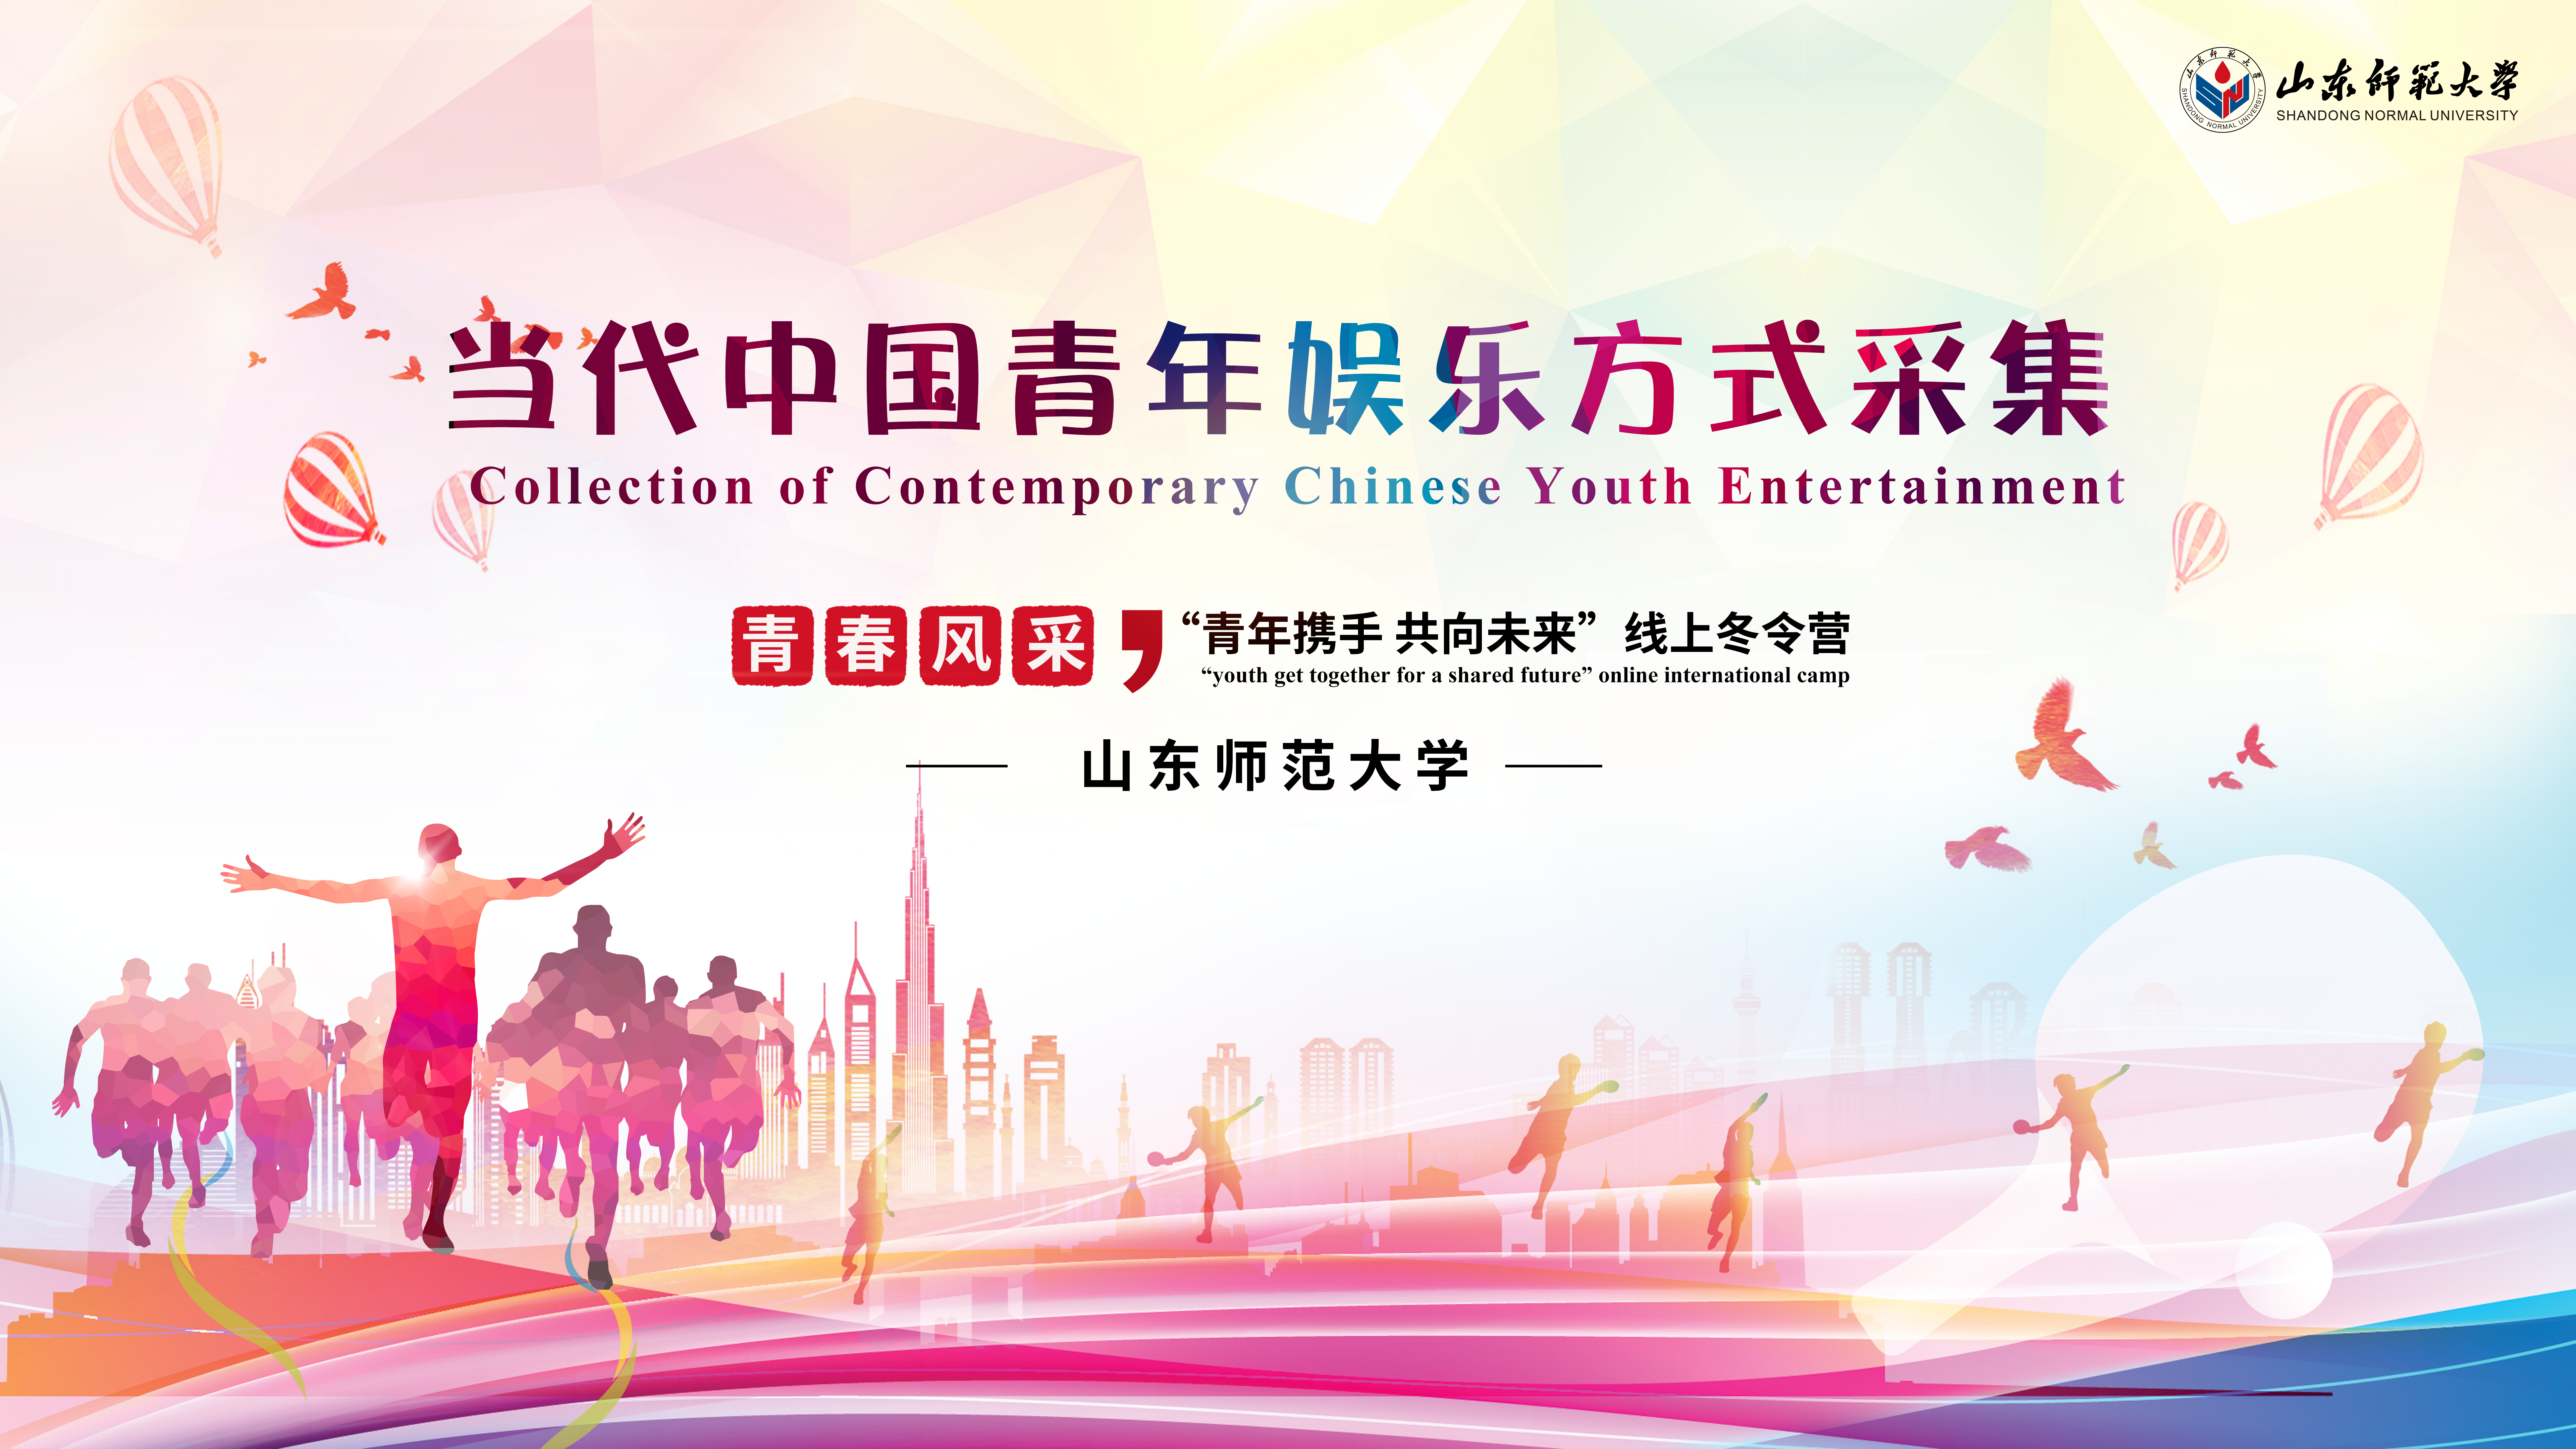 Collection of Contemporary Chinese Youth Entertainment